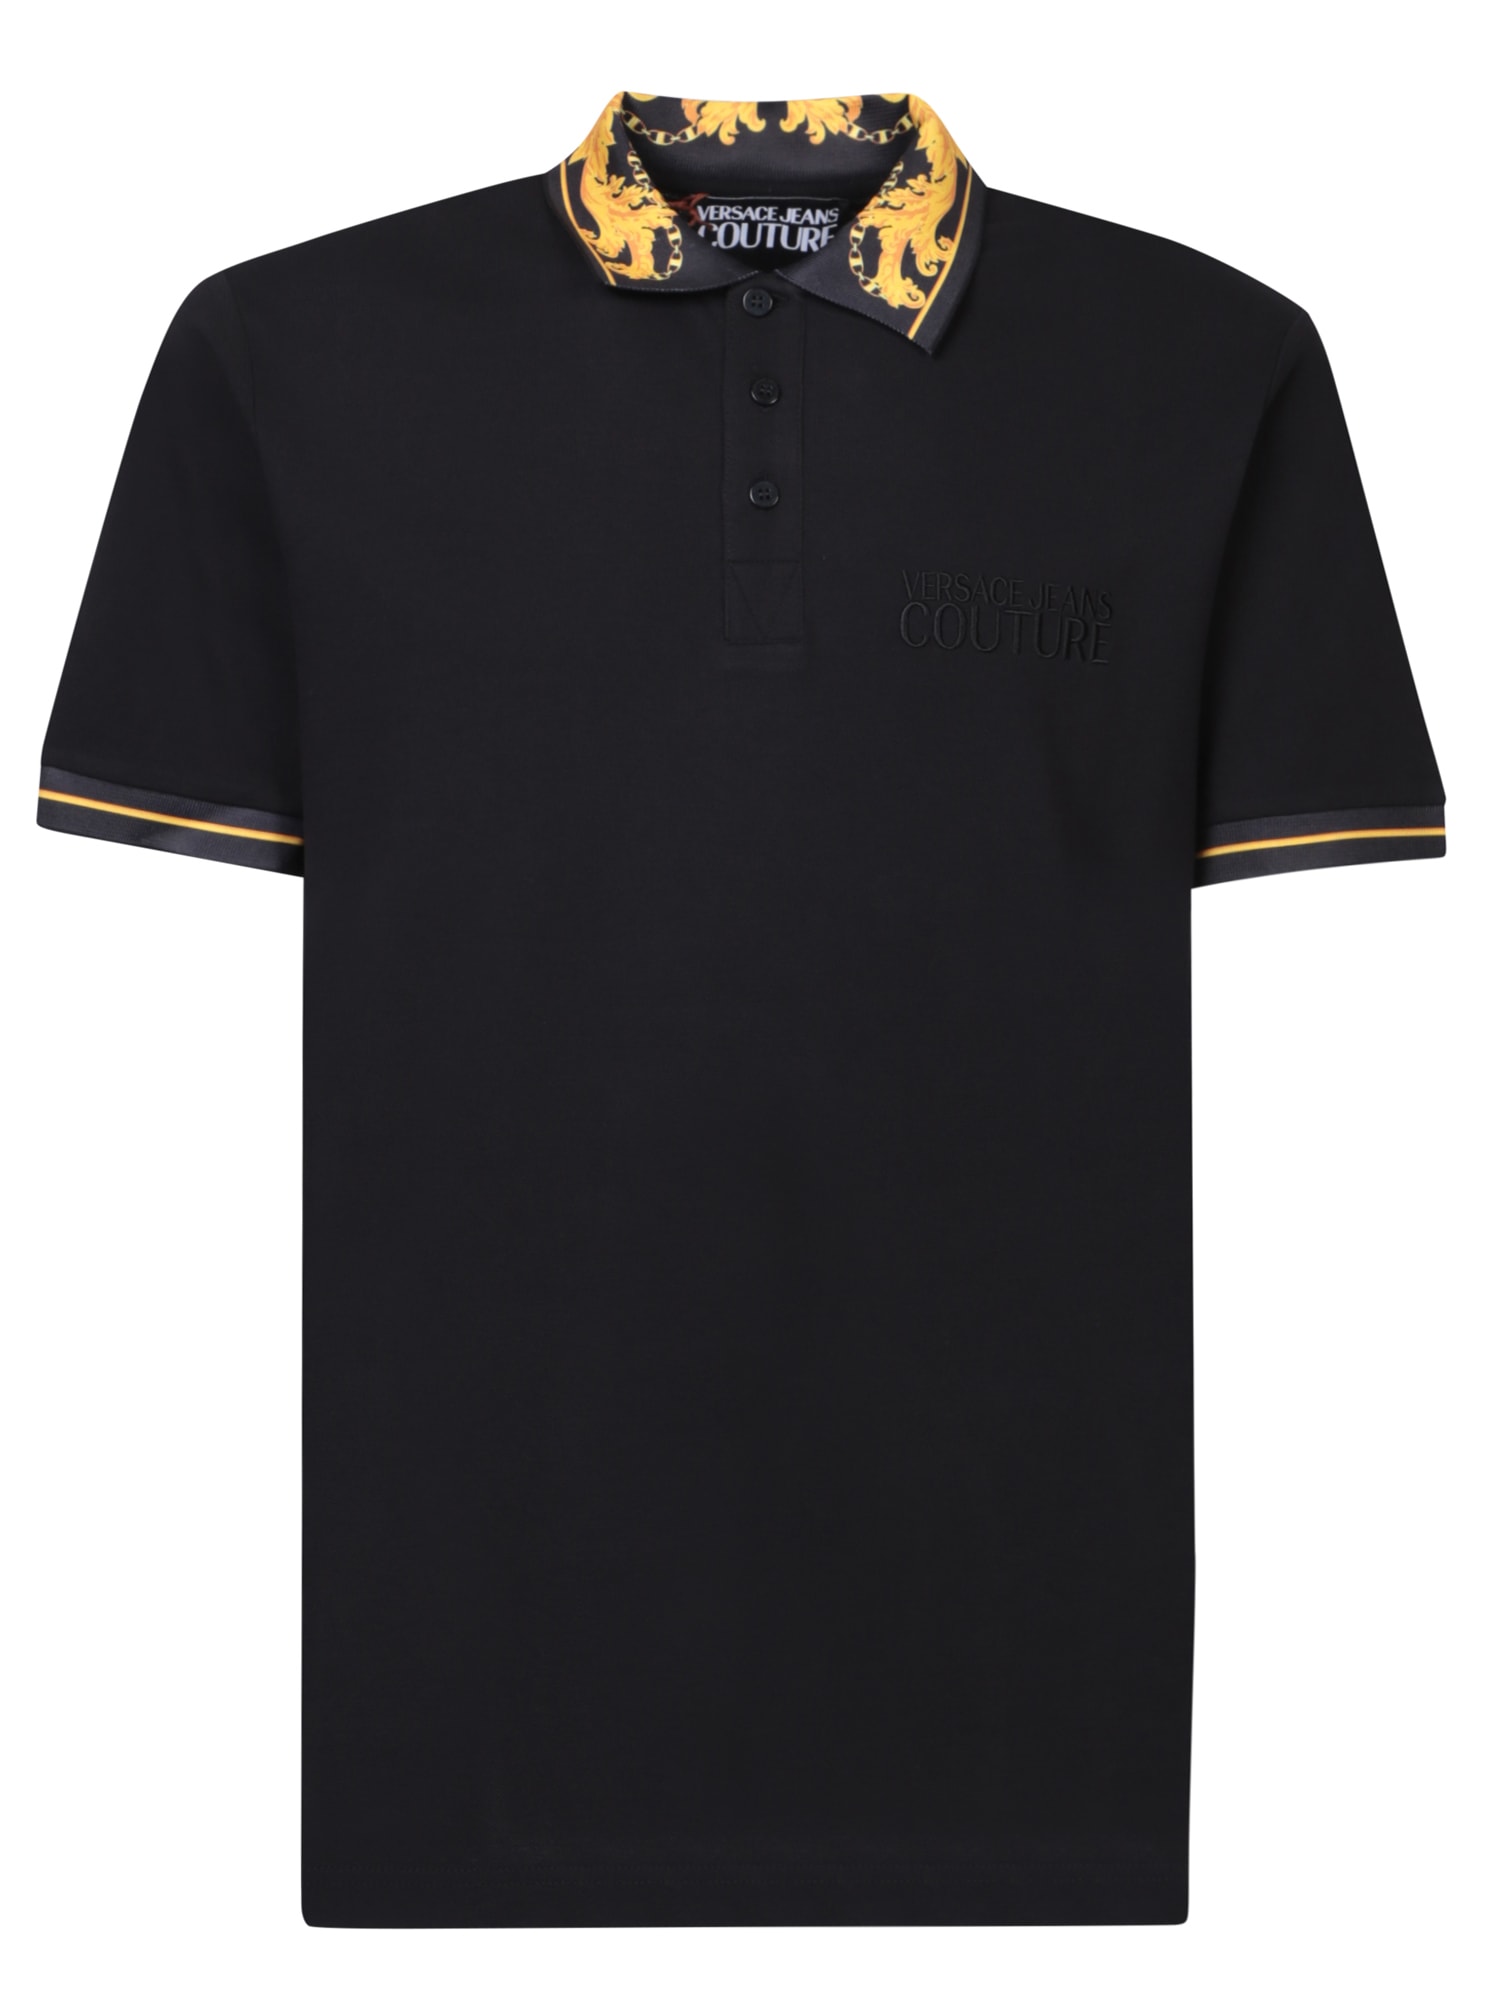 VERSACE JEANS COUTURE BAROQUE PRINT BLACK POLO SHIRT BY VERSACE JEANS COUTURE